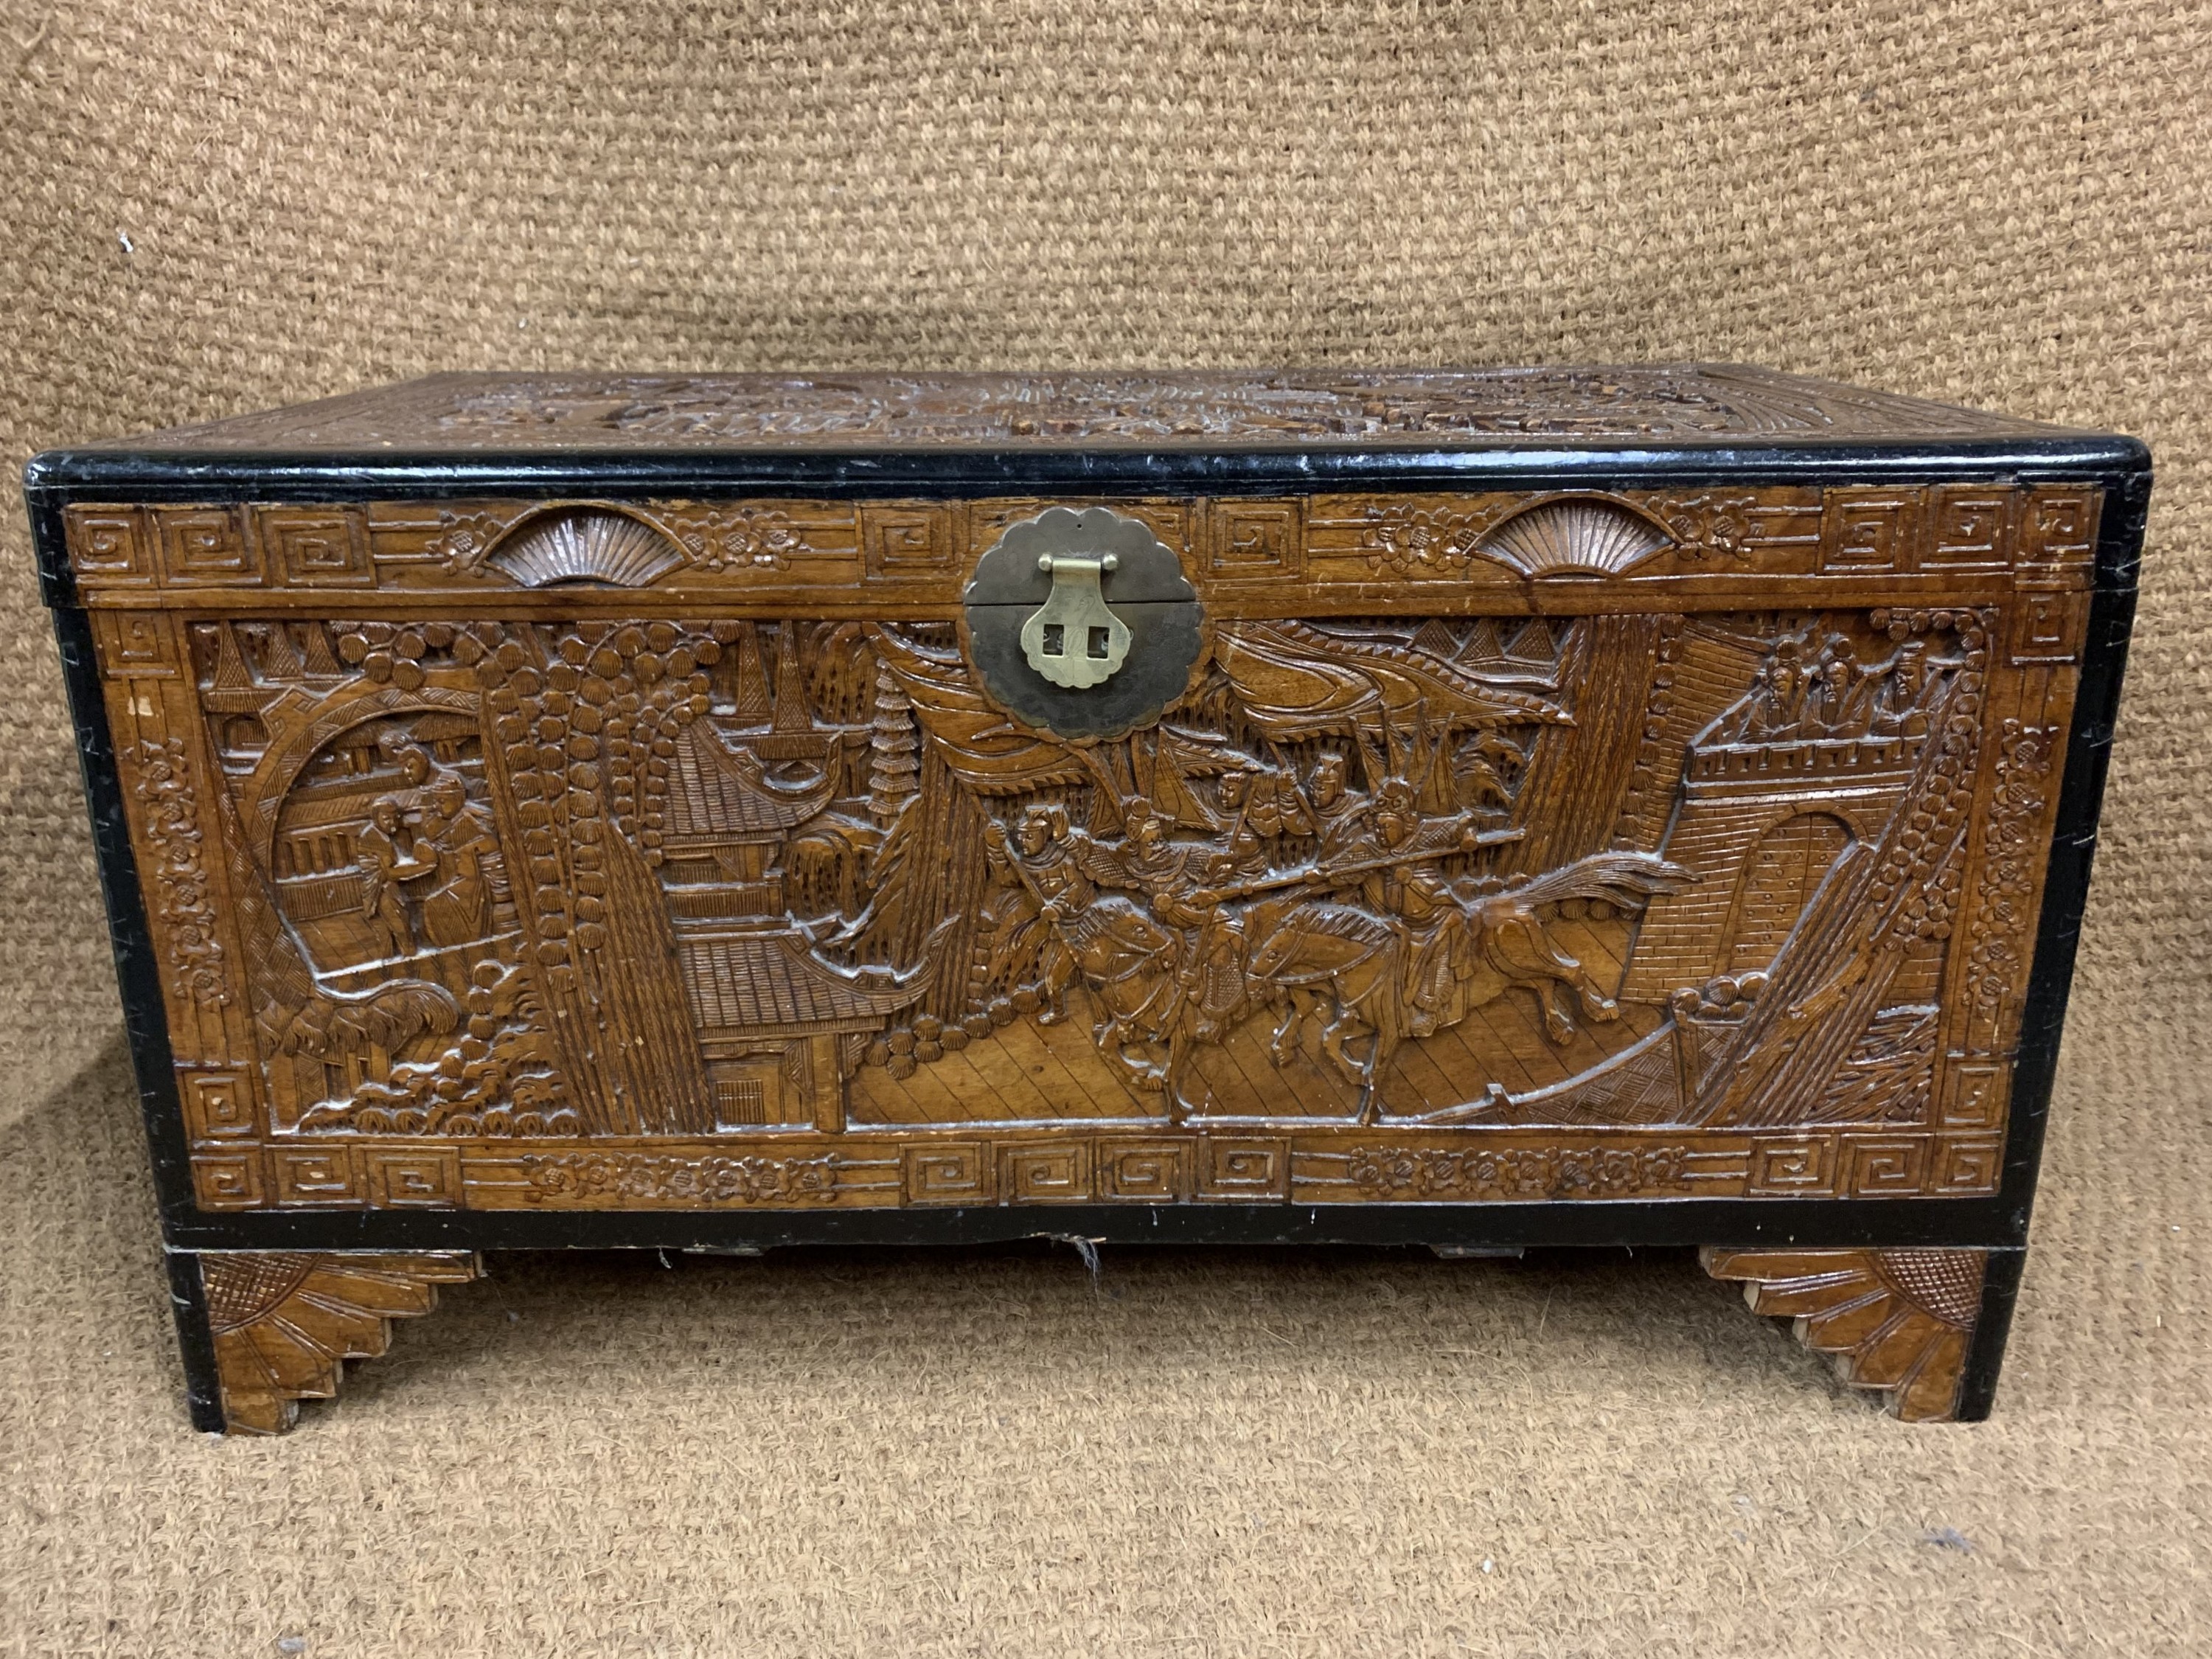 A 20th Century Chinese carved camphor wood chest, 100 cm x 54 cm x 53 cm